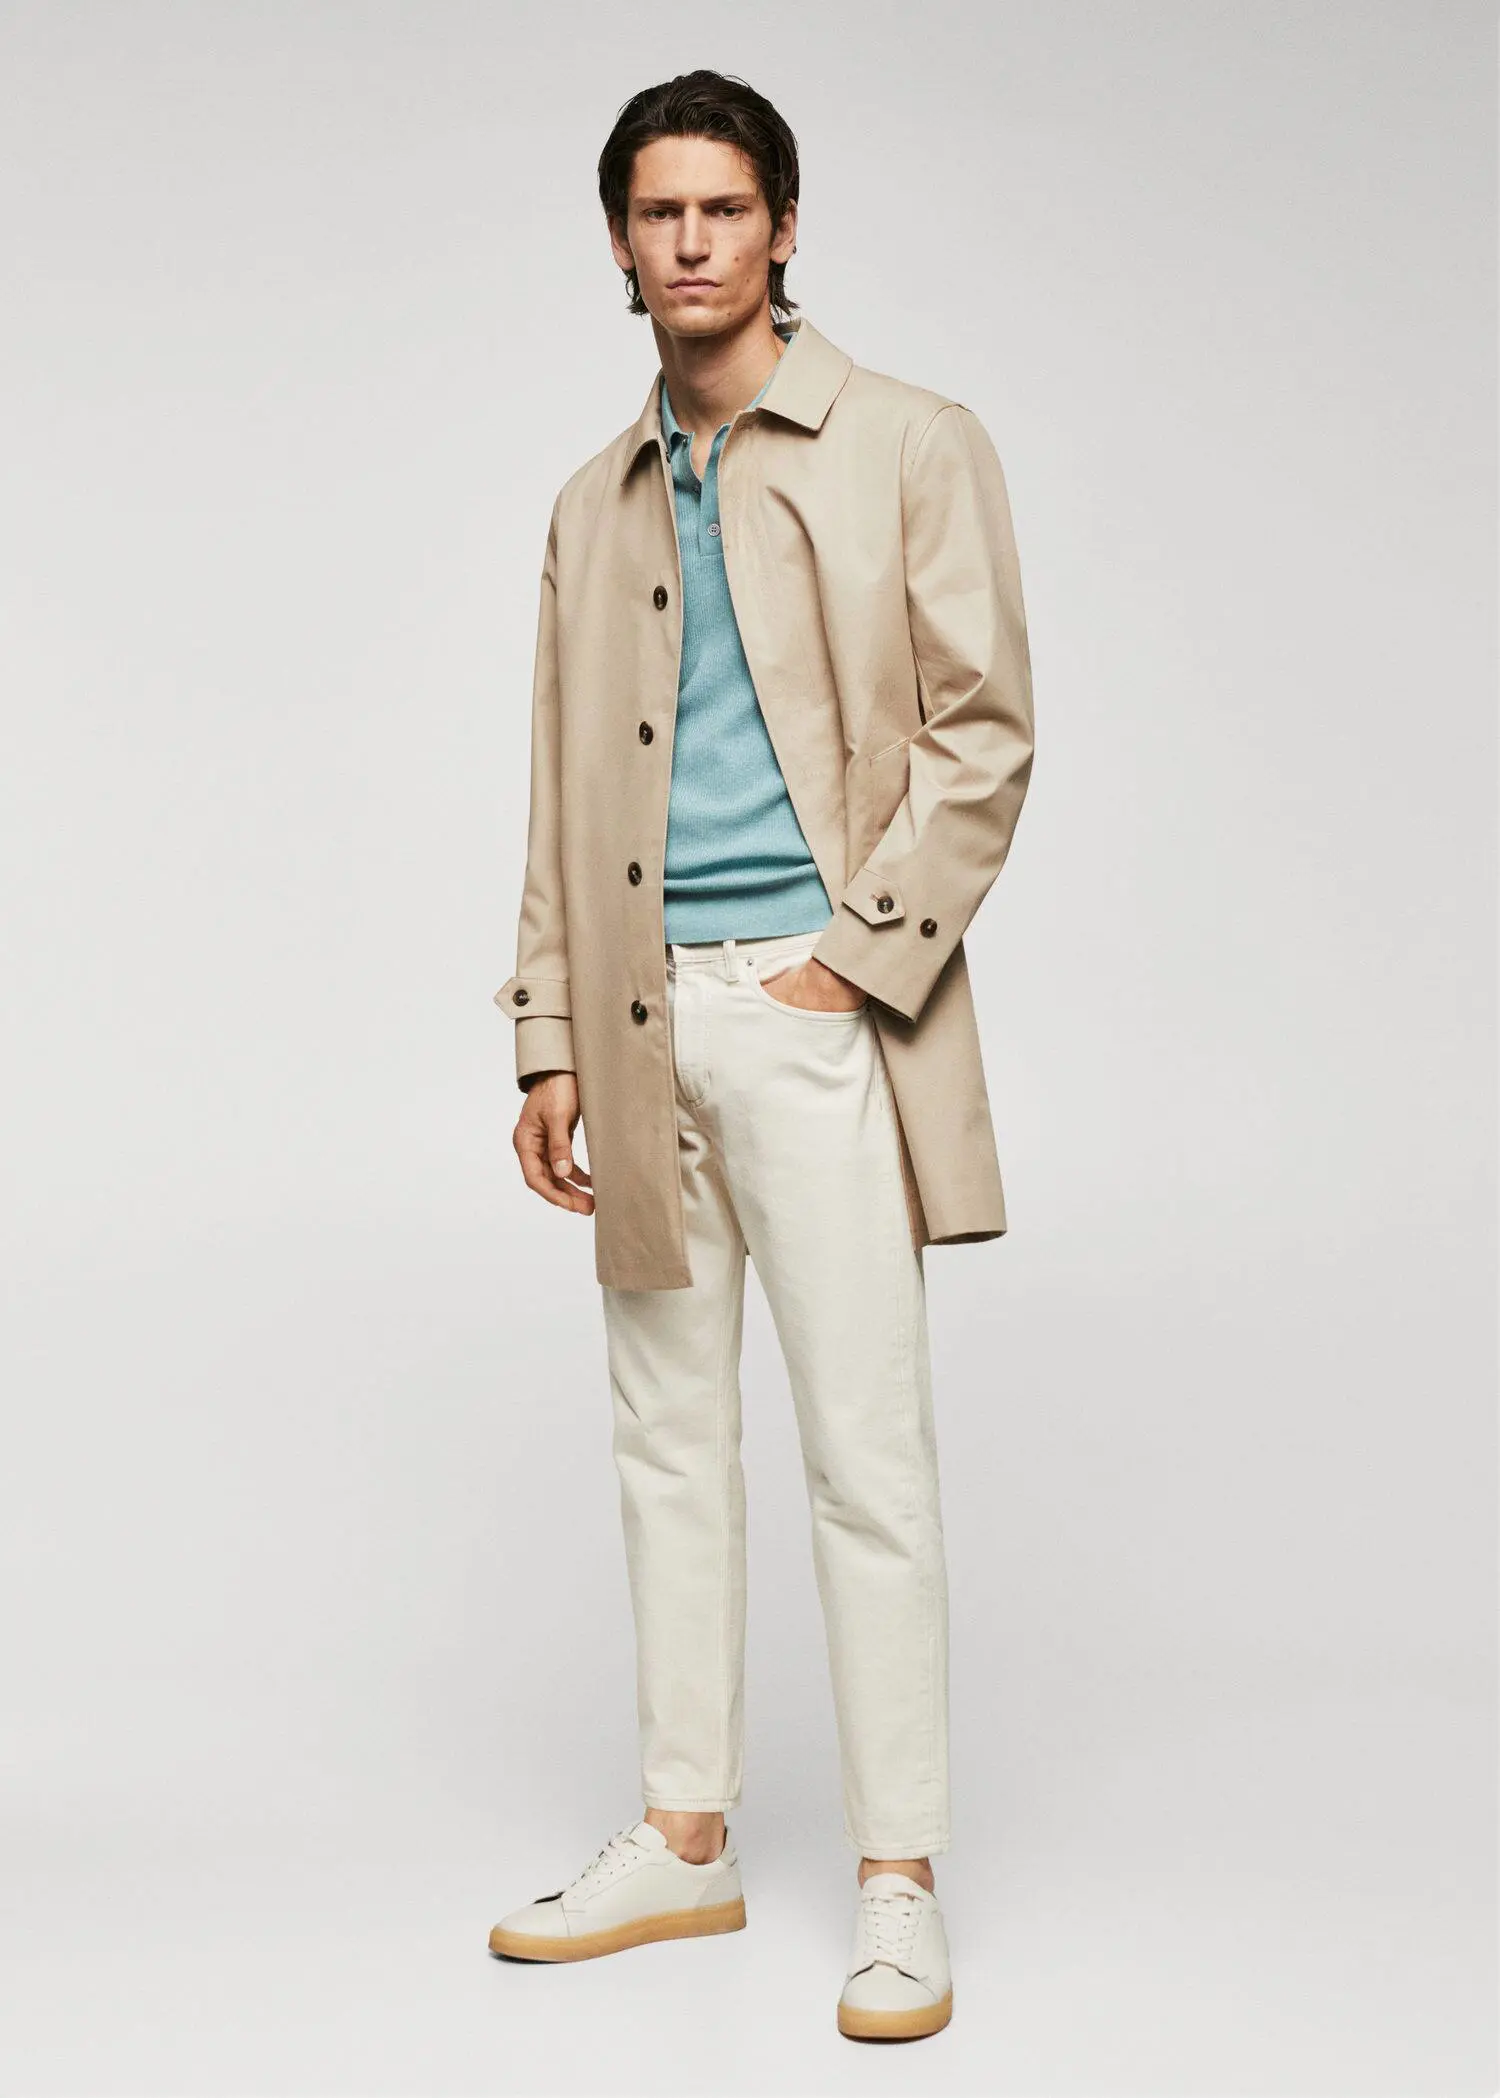 Mango Water-repellent cotton trench coat. a man in a tan coat and white pants. 